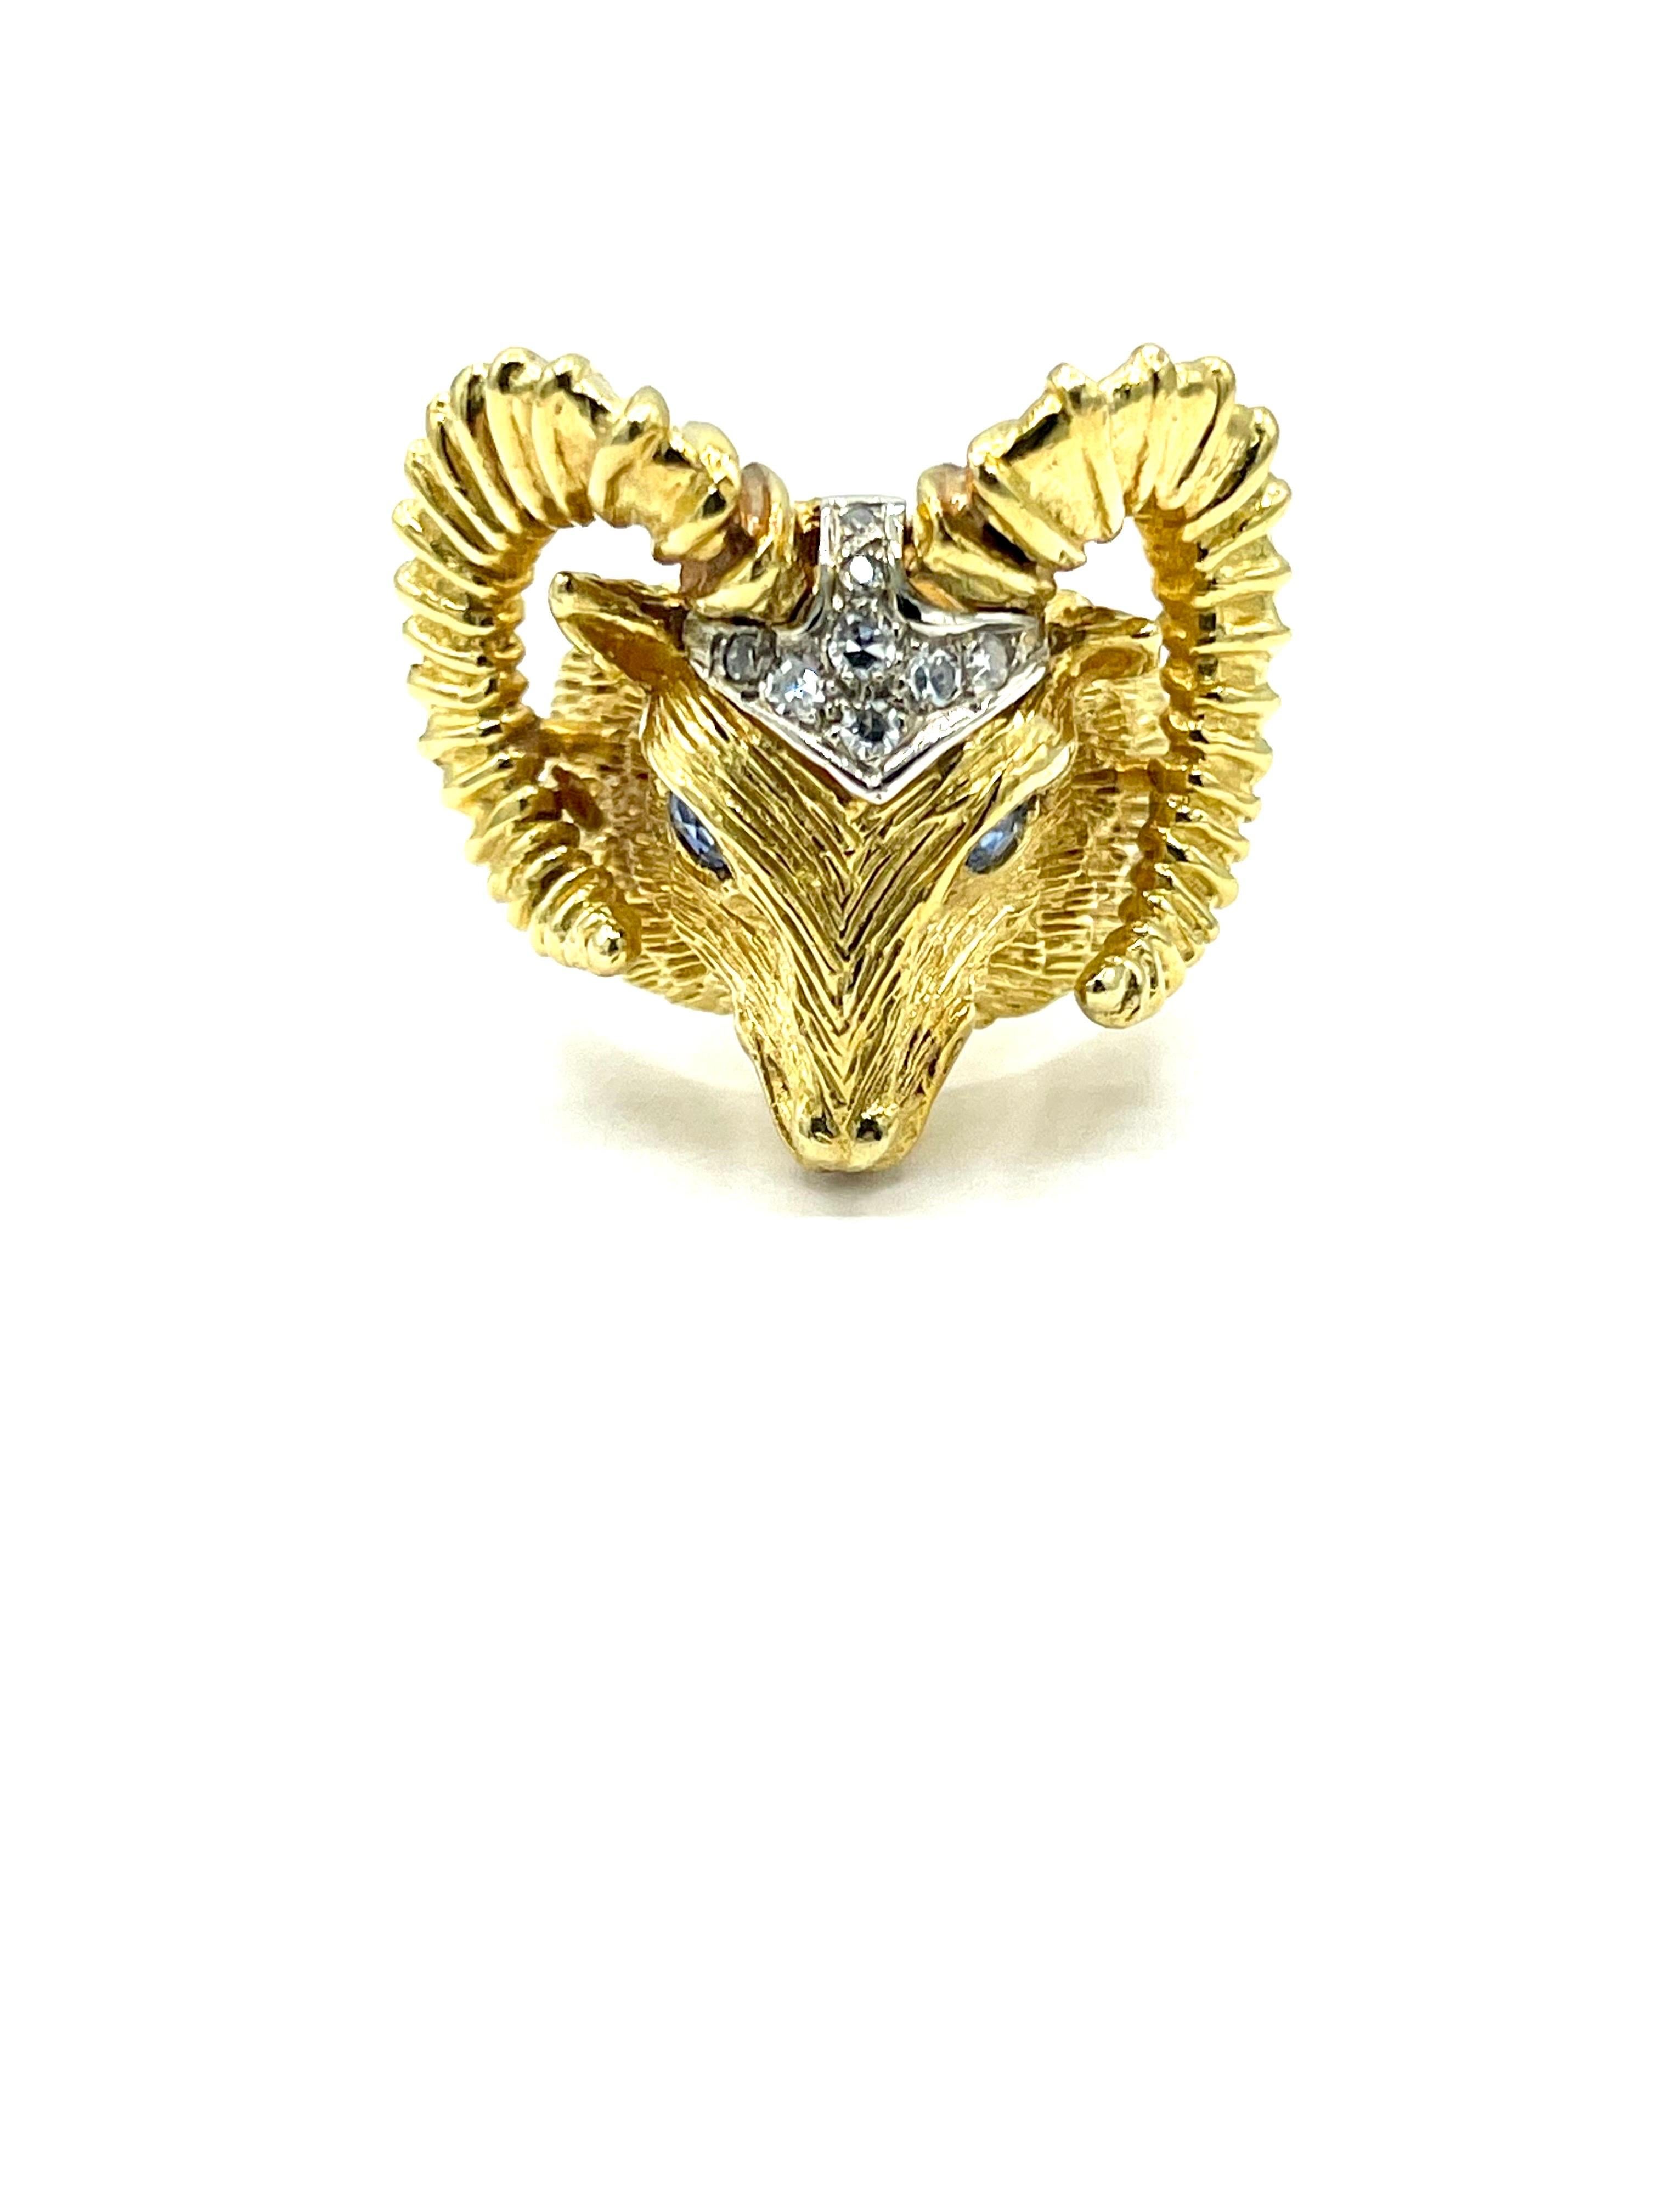 A beautifully handcrafted ram's head ring!  The attention to detail is fantastic.  The ram's horns and head are a textured finish to give a very realistic look.  The top of the ram's head contains seven Diamonds with a total weight of 0.14 carats,